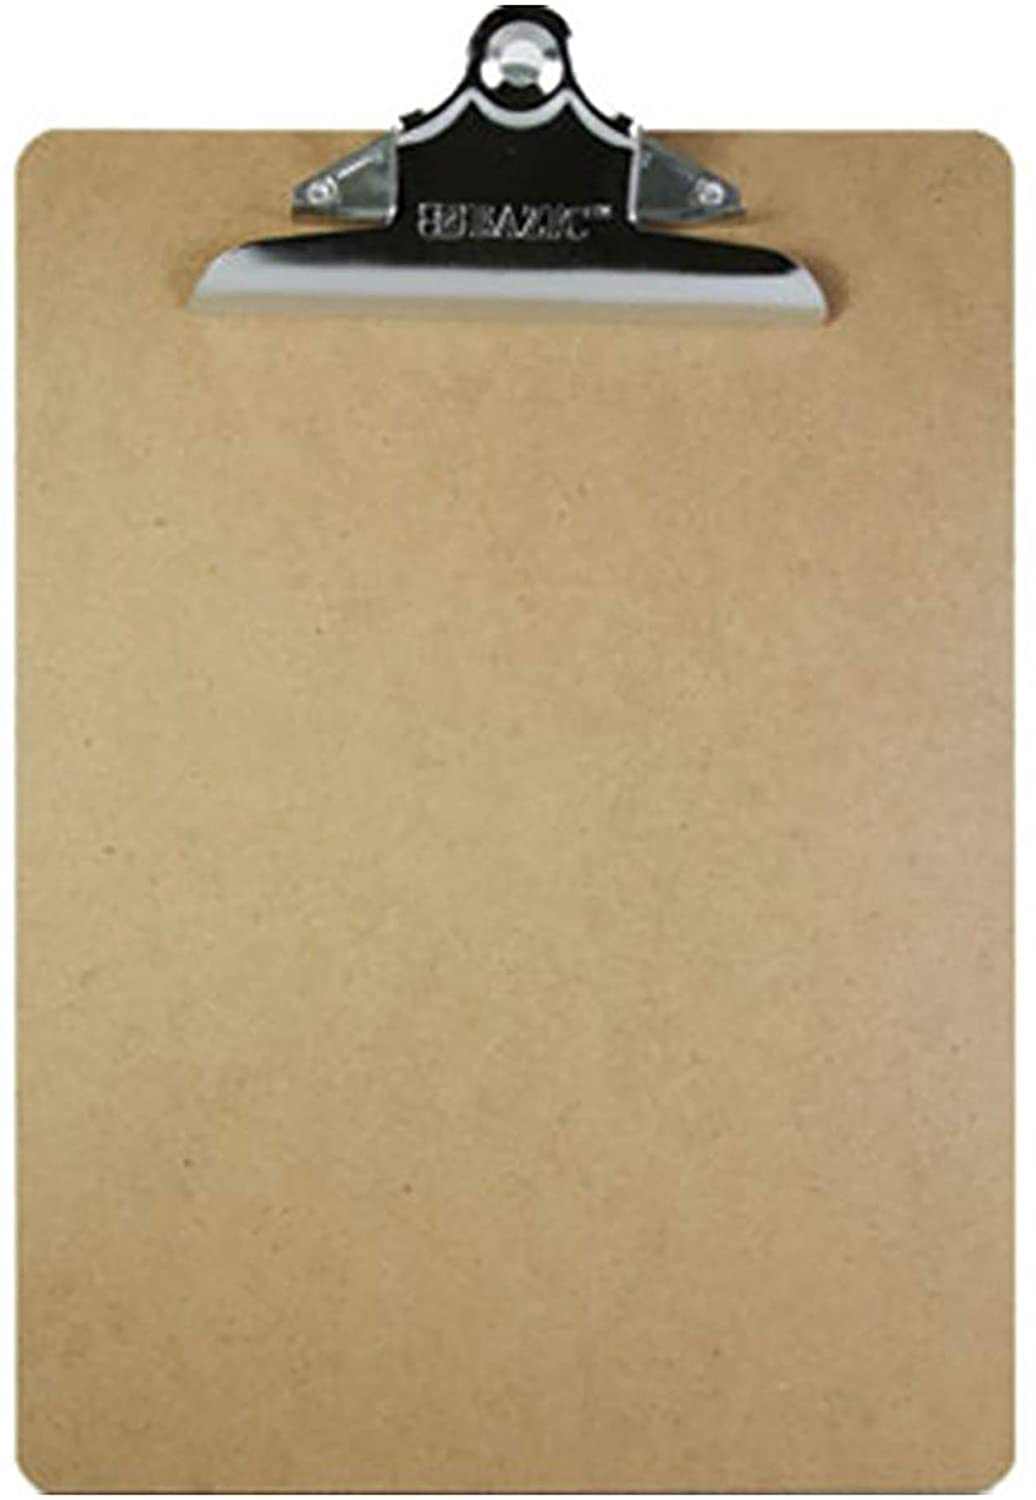 Sturdy Spring Clip, 12.5" x 9" Fit A4 Letter Size Paperboard Strong &amp; Large Capacity, Business Office School Teacher Student College, 4-Pack.